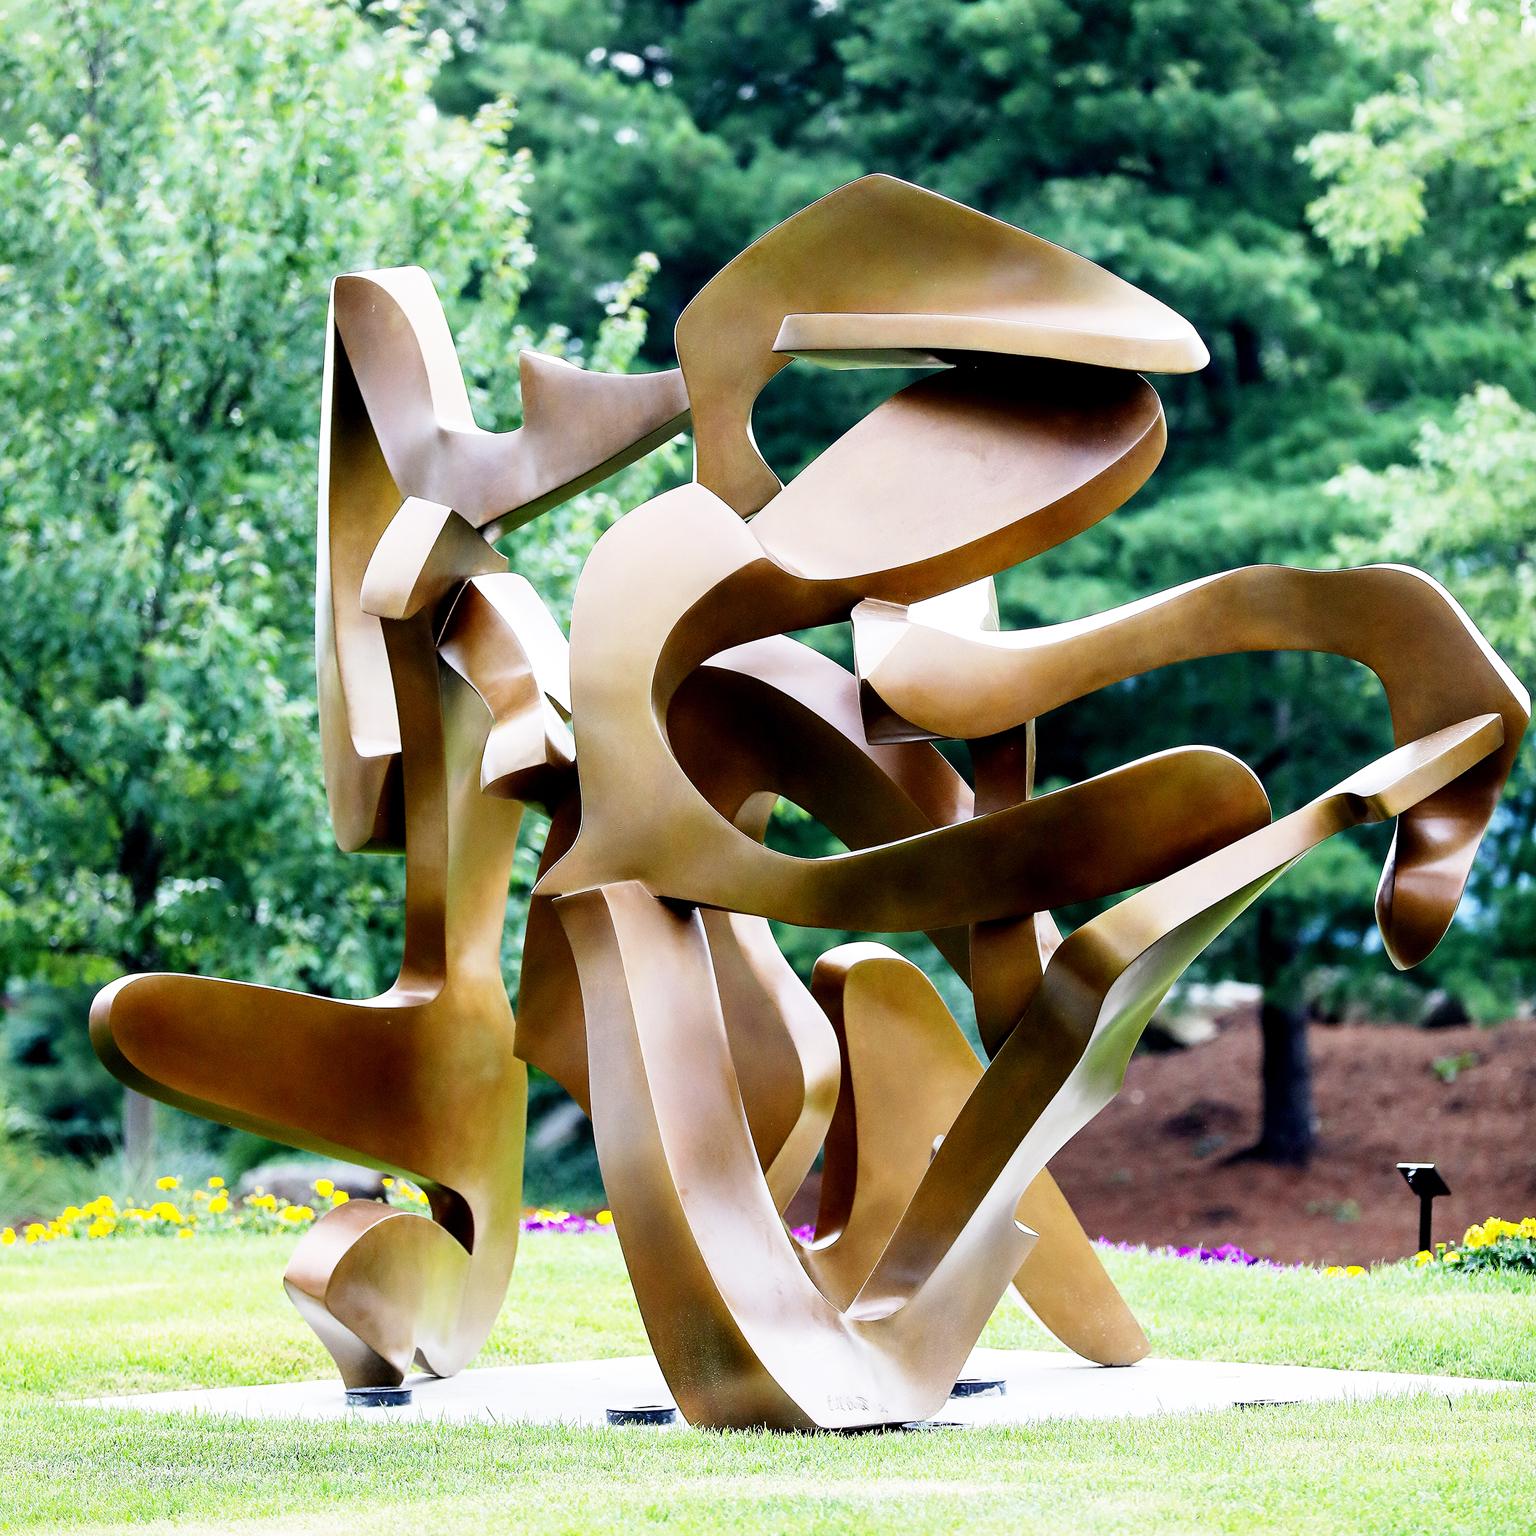 "Action Abstraction" by Bill Barrett
Fabricated bronze

Bill Barrett is considered a central figure in the second generation of American metal sculptors and is internationally known for his abstract sculptures in steel, aluminum and bronze.

Bronze,